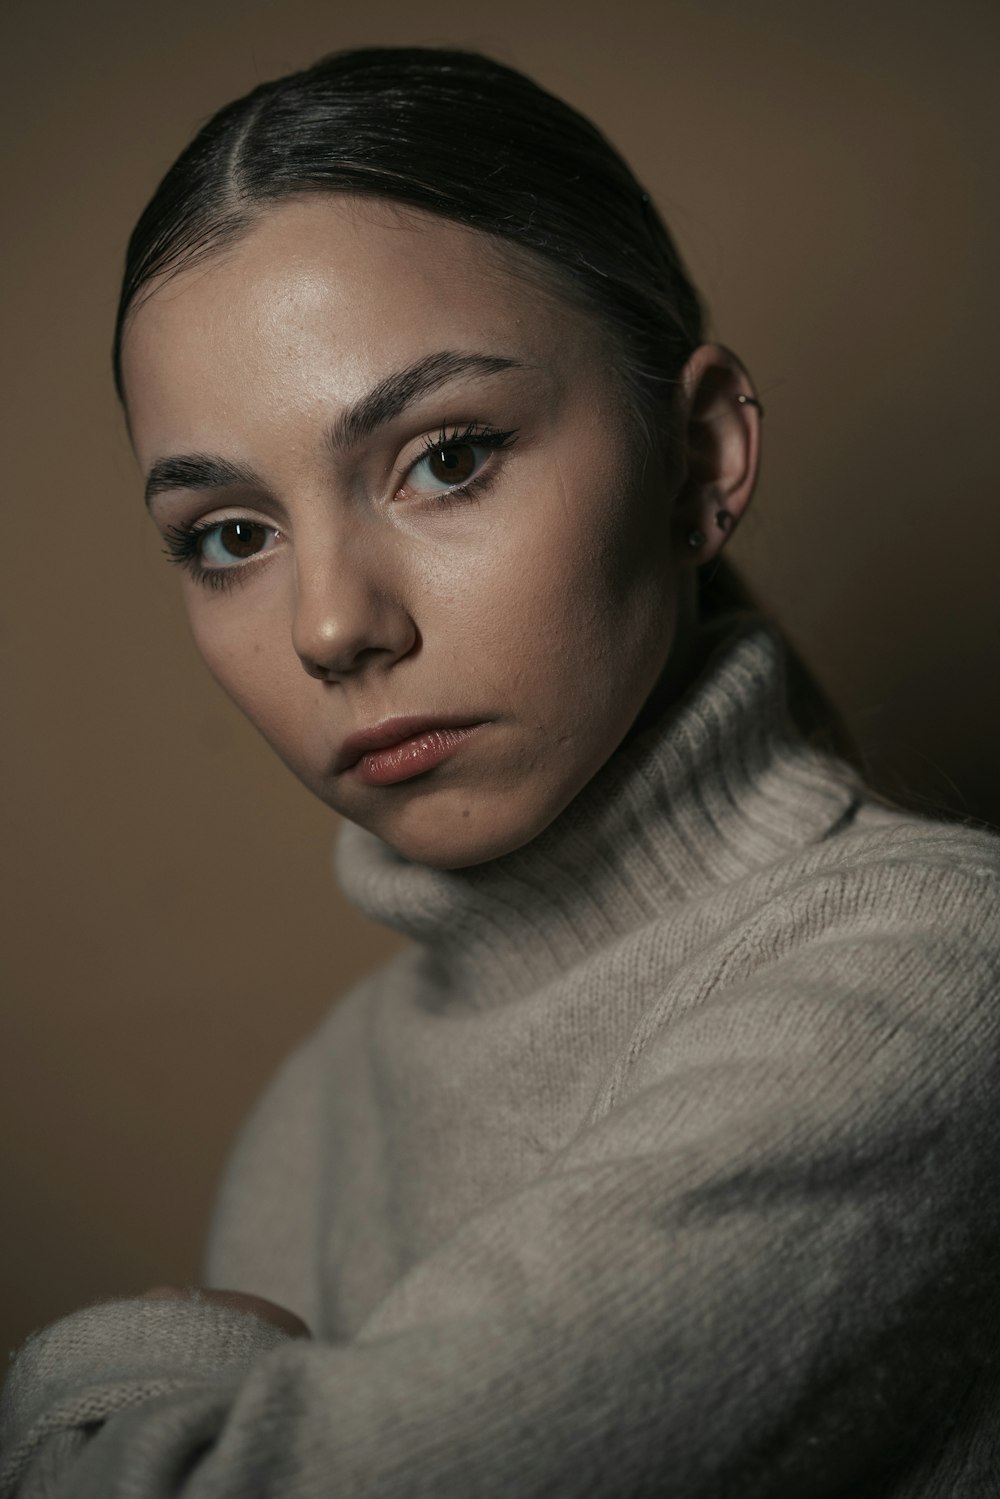 a woman in a turtle neck sweater posing for a picture